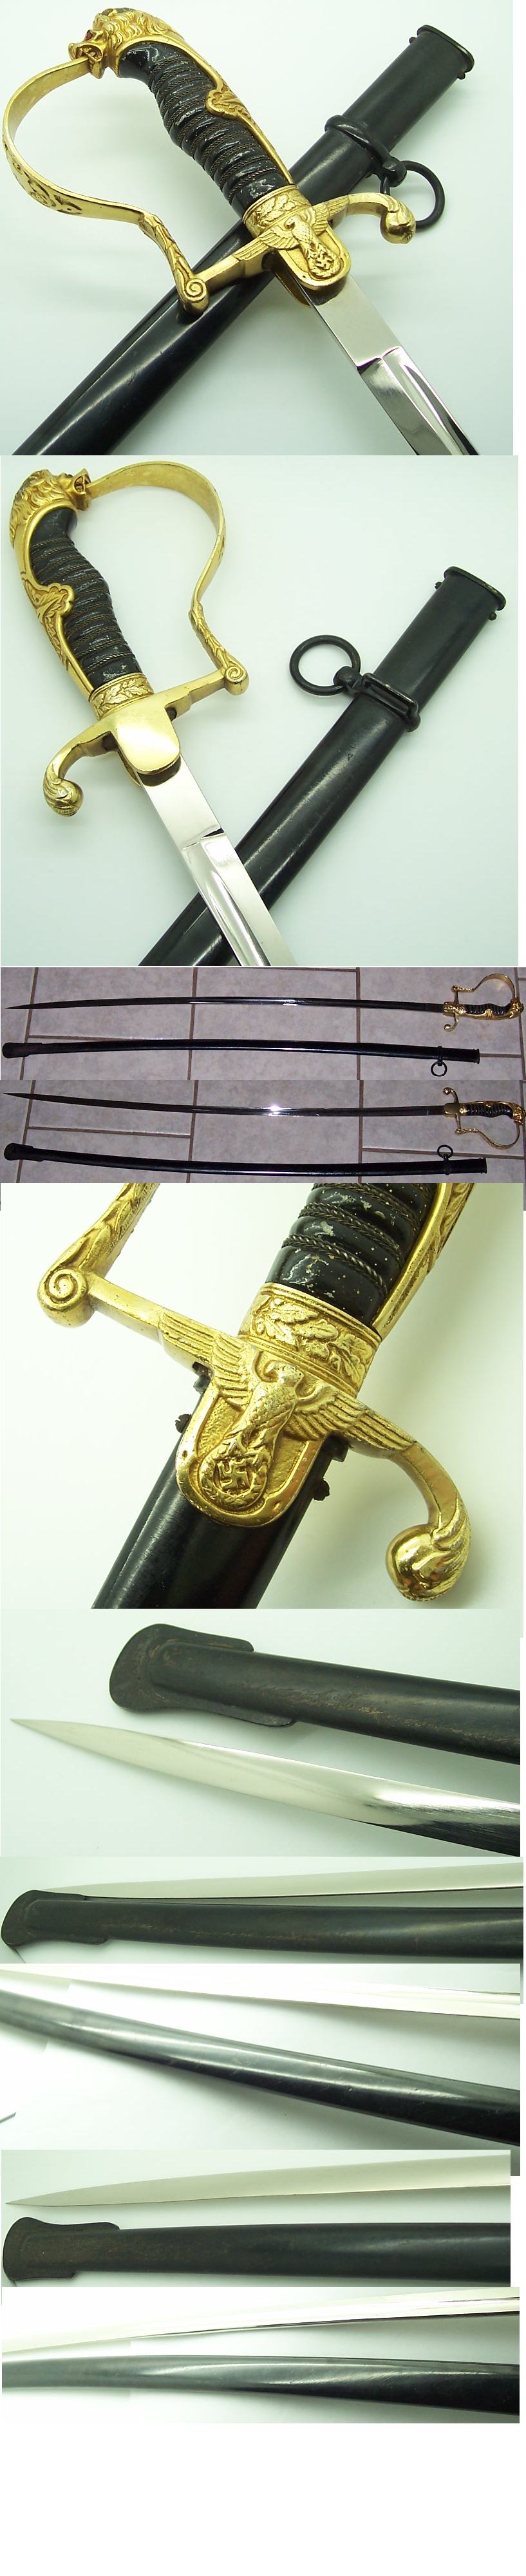 Lion-head Army Sword by Clemen & Jung